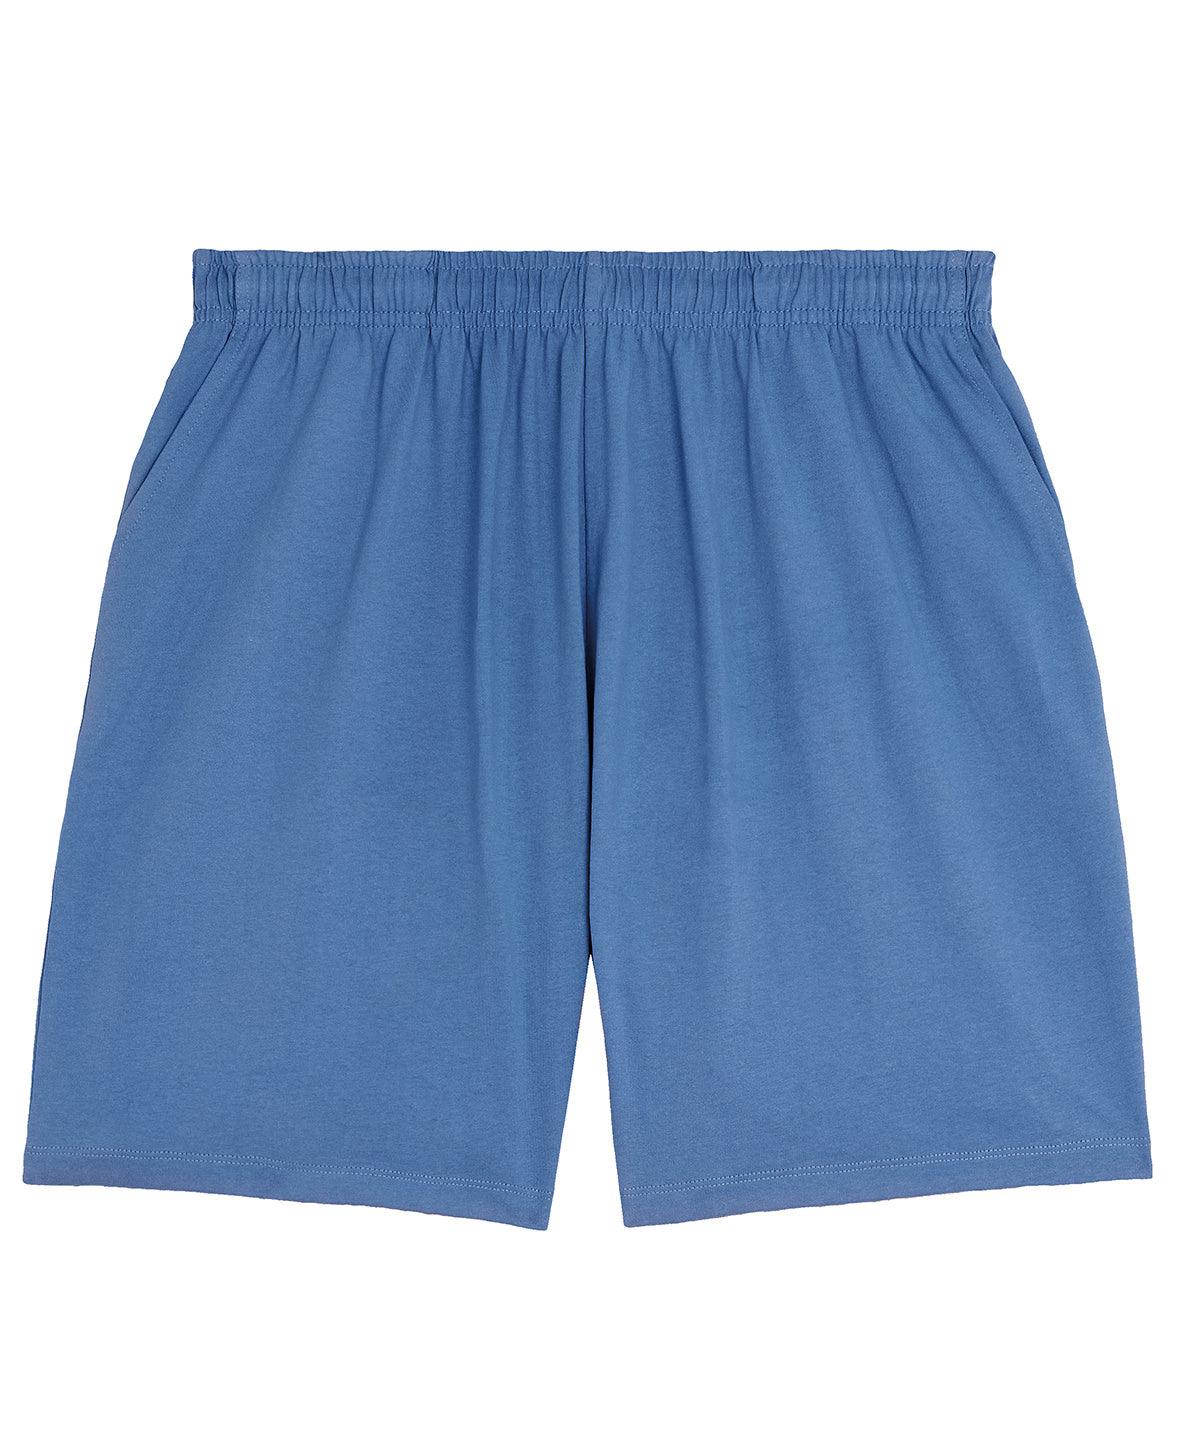 Bright Blue - Unisex Waker shorts (STBU070) Shorts Stanley/Stella New Styles for 2023, Organic & Conscious, Plus Sizes, Rebrandable, Trousers & Shorts Schoolwear Centres